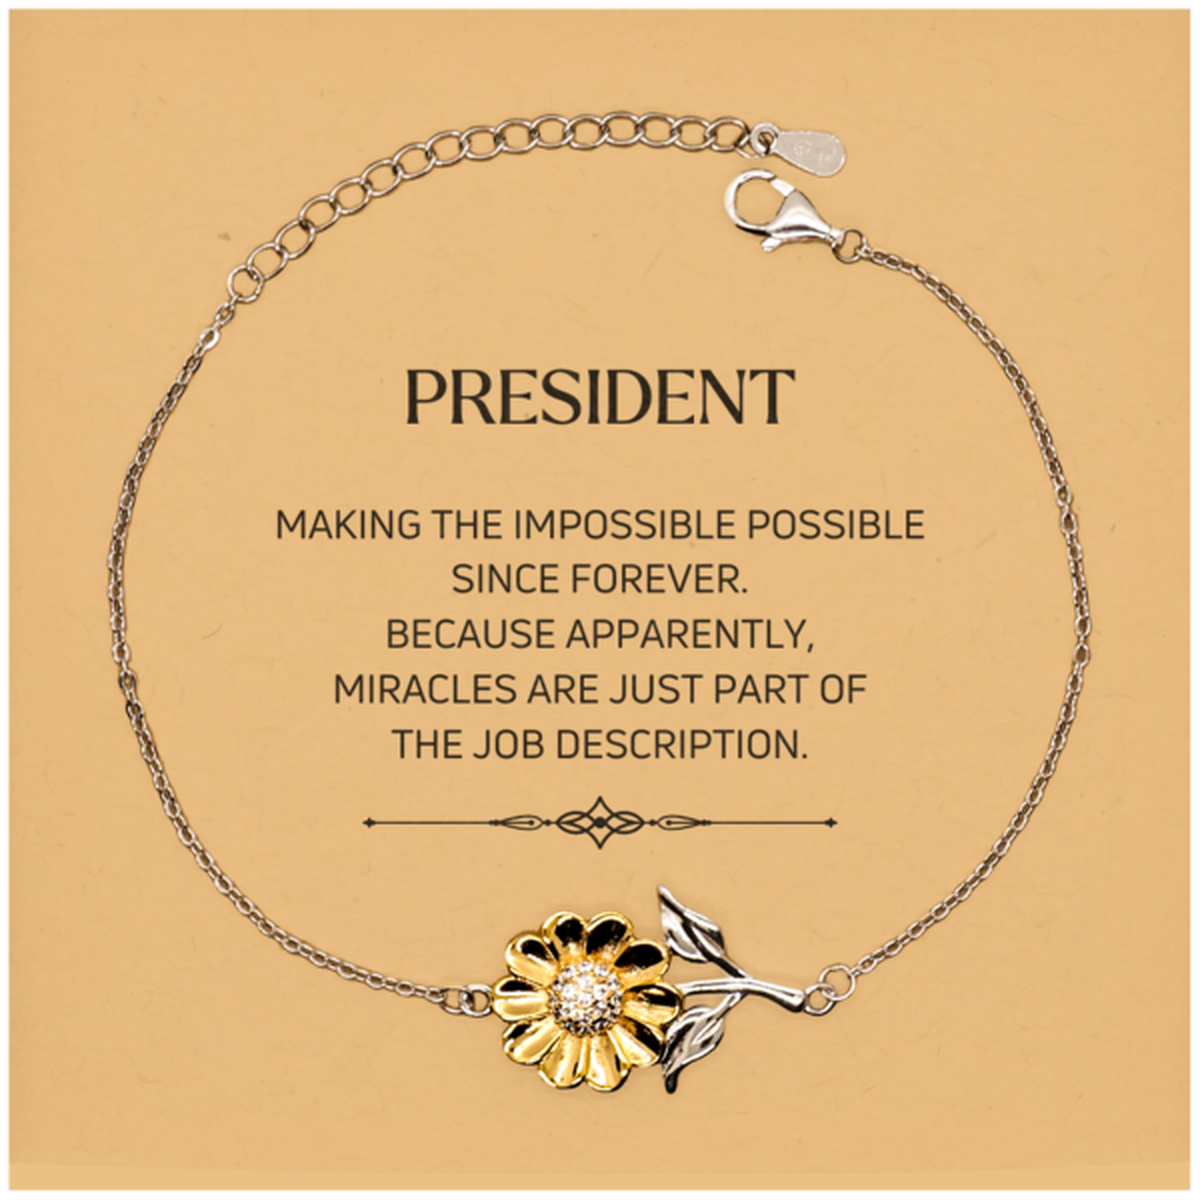 Funny President Gifts, Miracles are just part of the job description, Inspirational Birthday Christmas Sunflower Bracelet For President, Men, Women, Coworkers, Friends, Boss